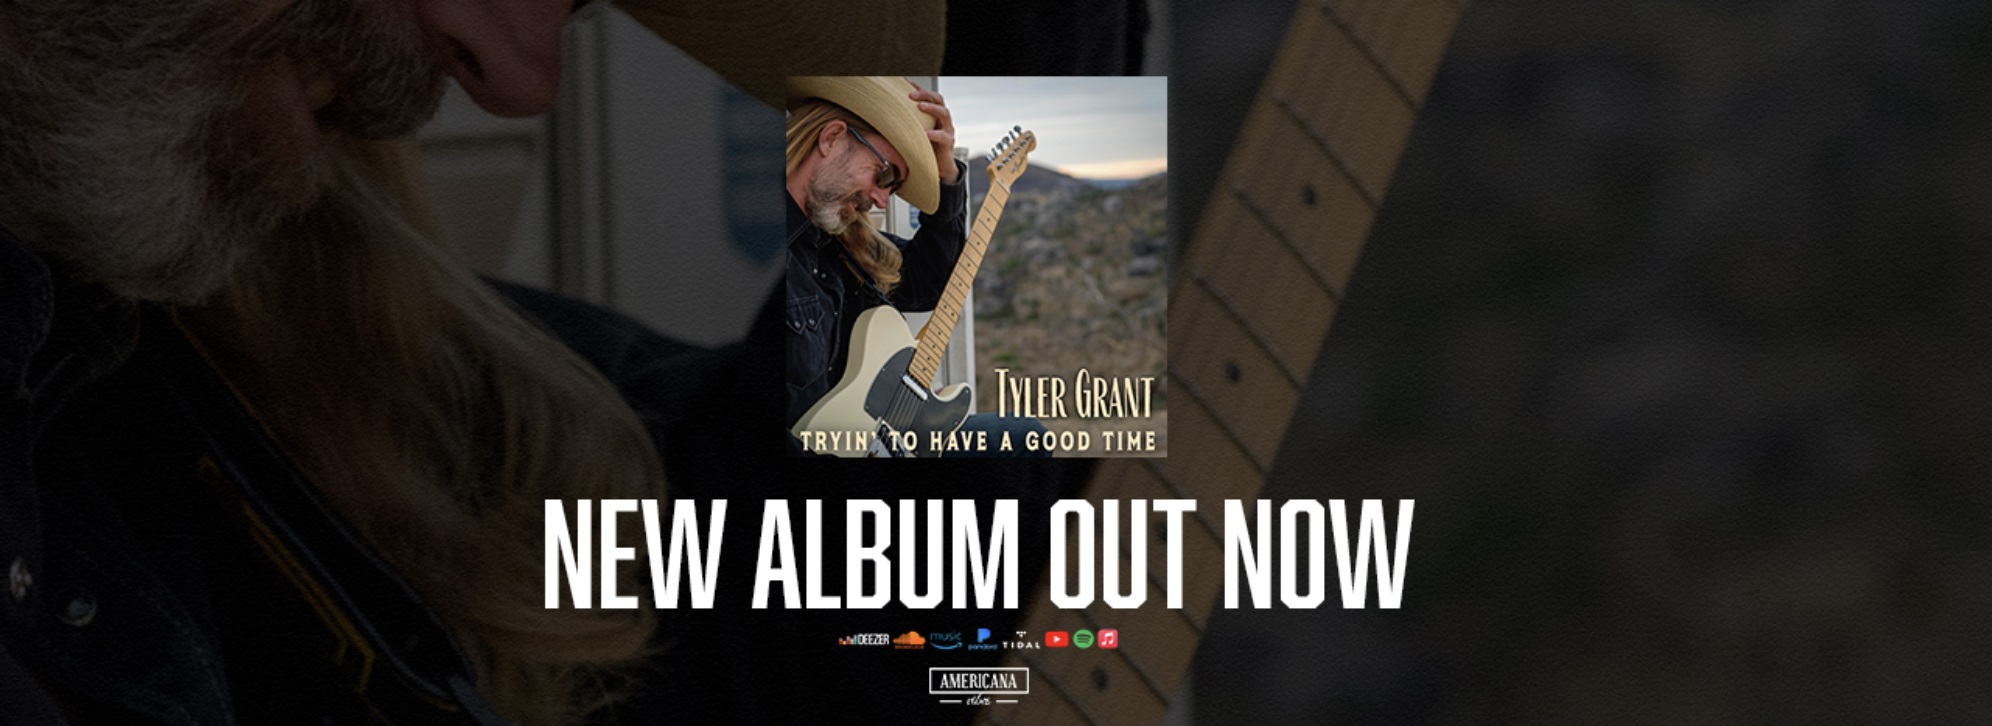 Tyler Grant, National Flatpicking Champ, Releases Tryin’ To Have A Good Time